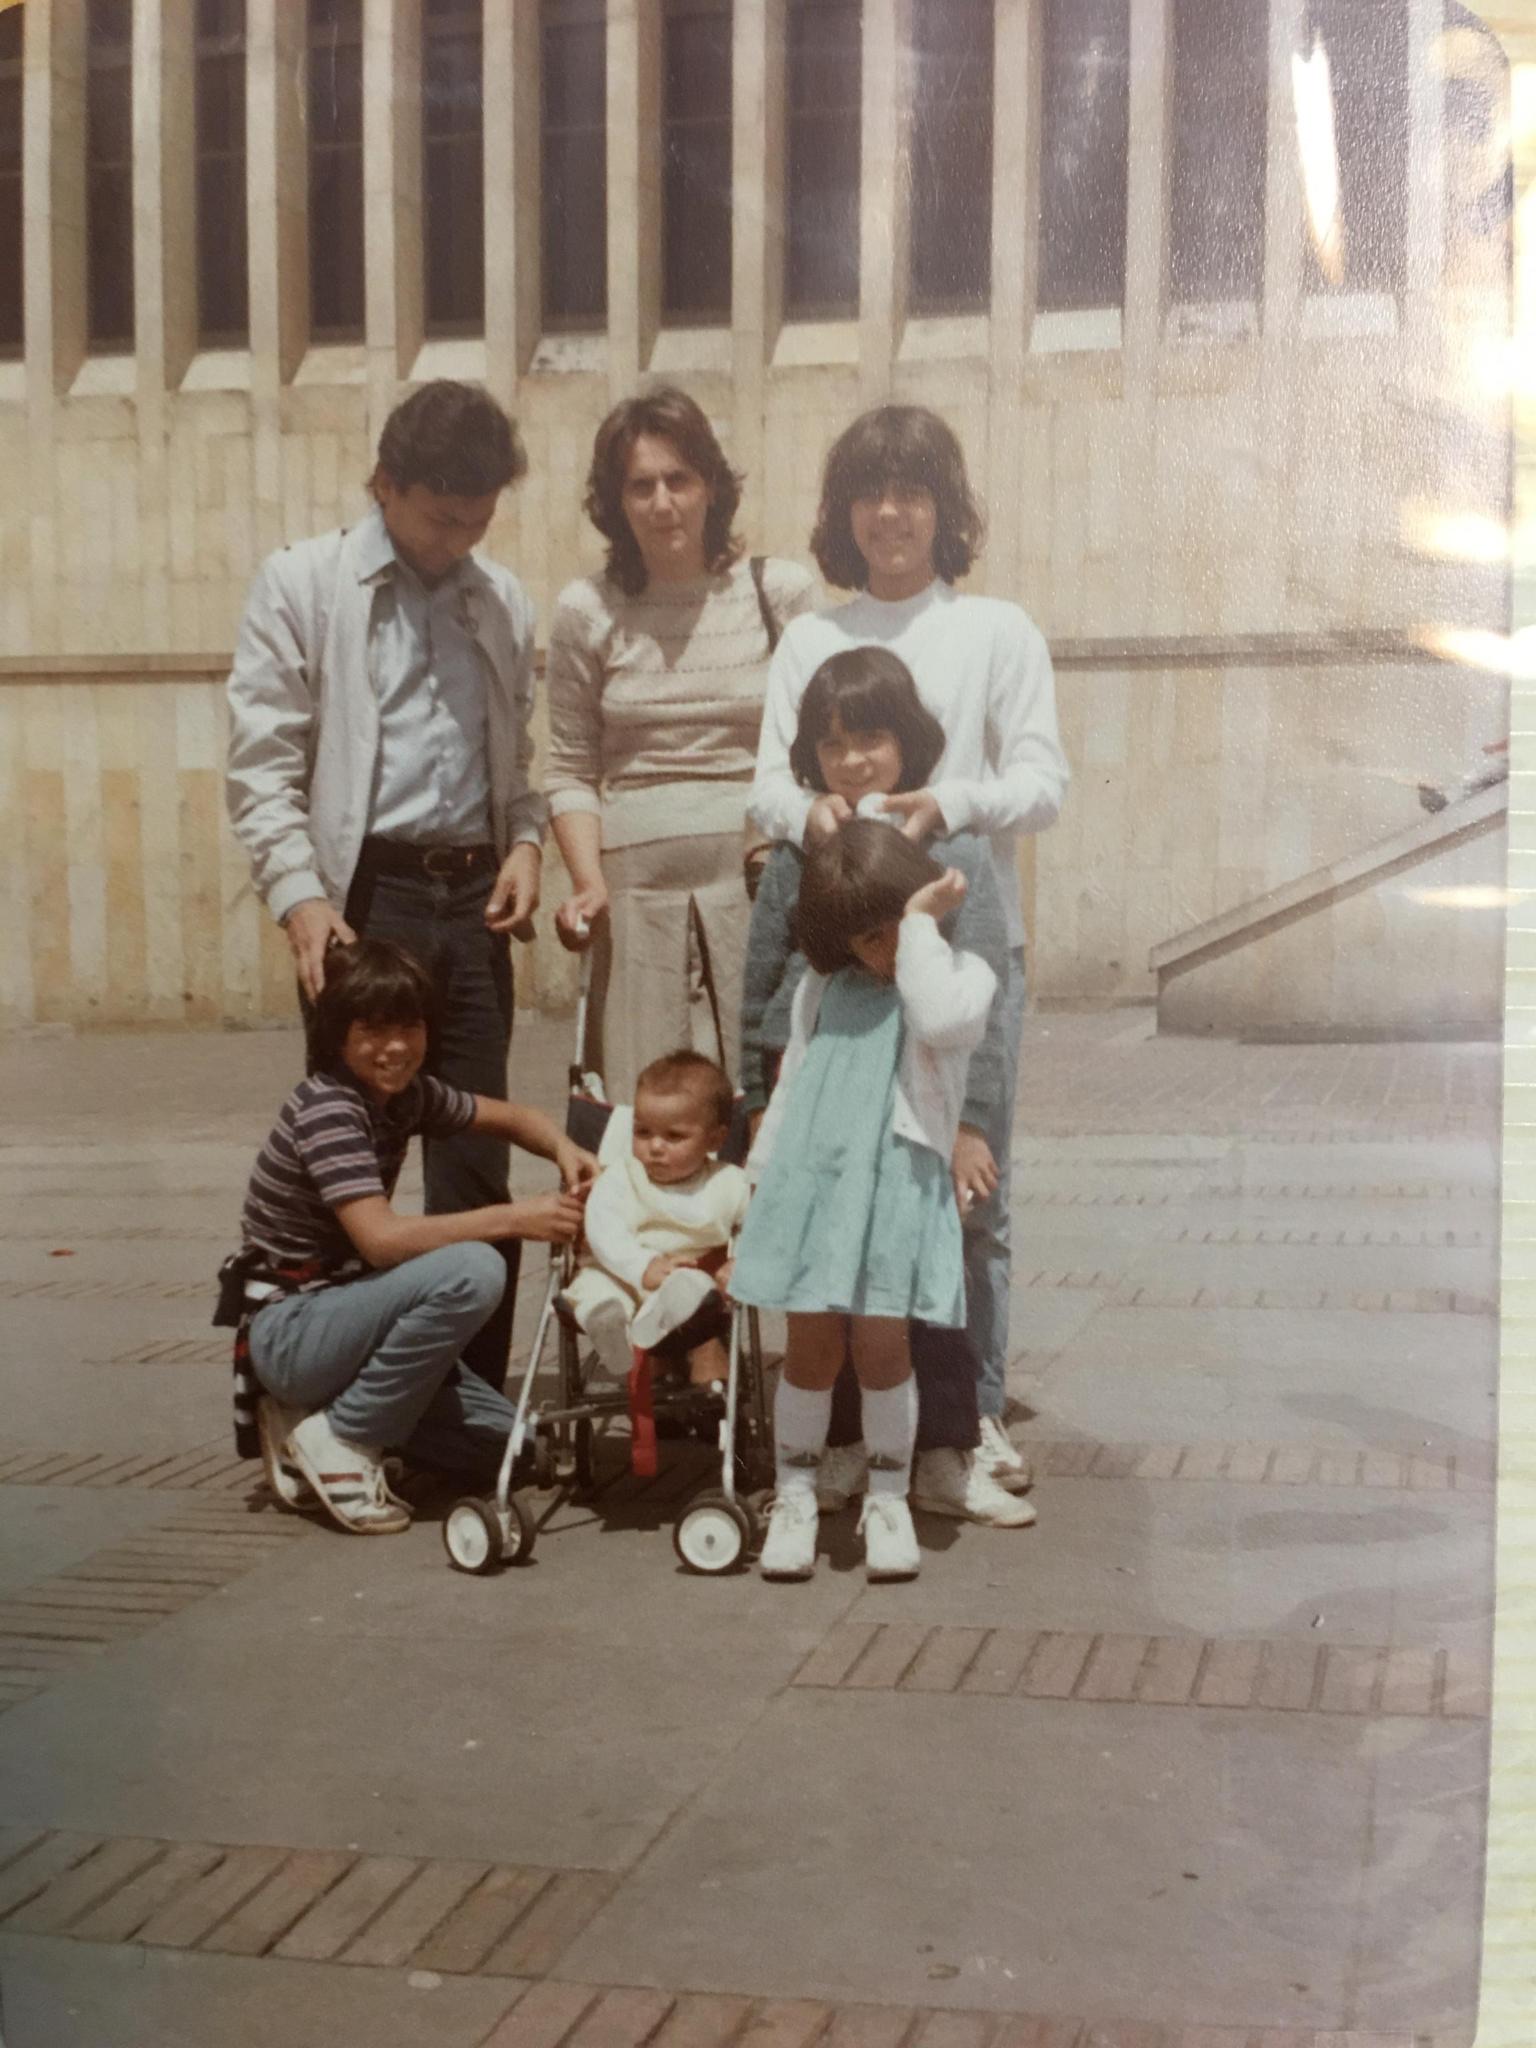 Photo of Magistrate Urán, his wife, and their children in front of the Palace of Justice a few days before the Palace of Justice siege. Photo courtesy of Helena Urán.